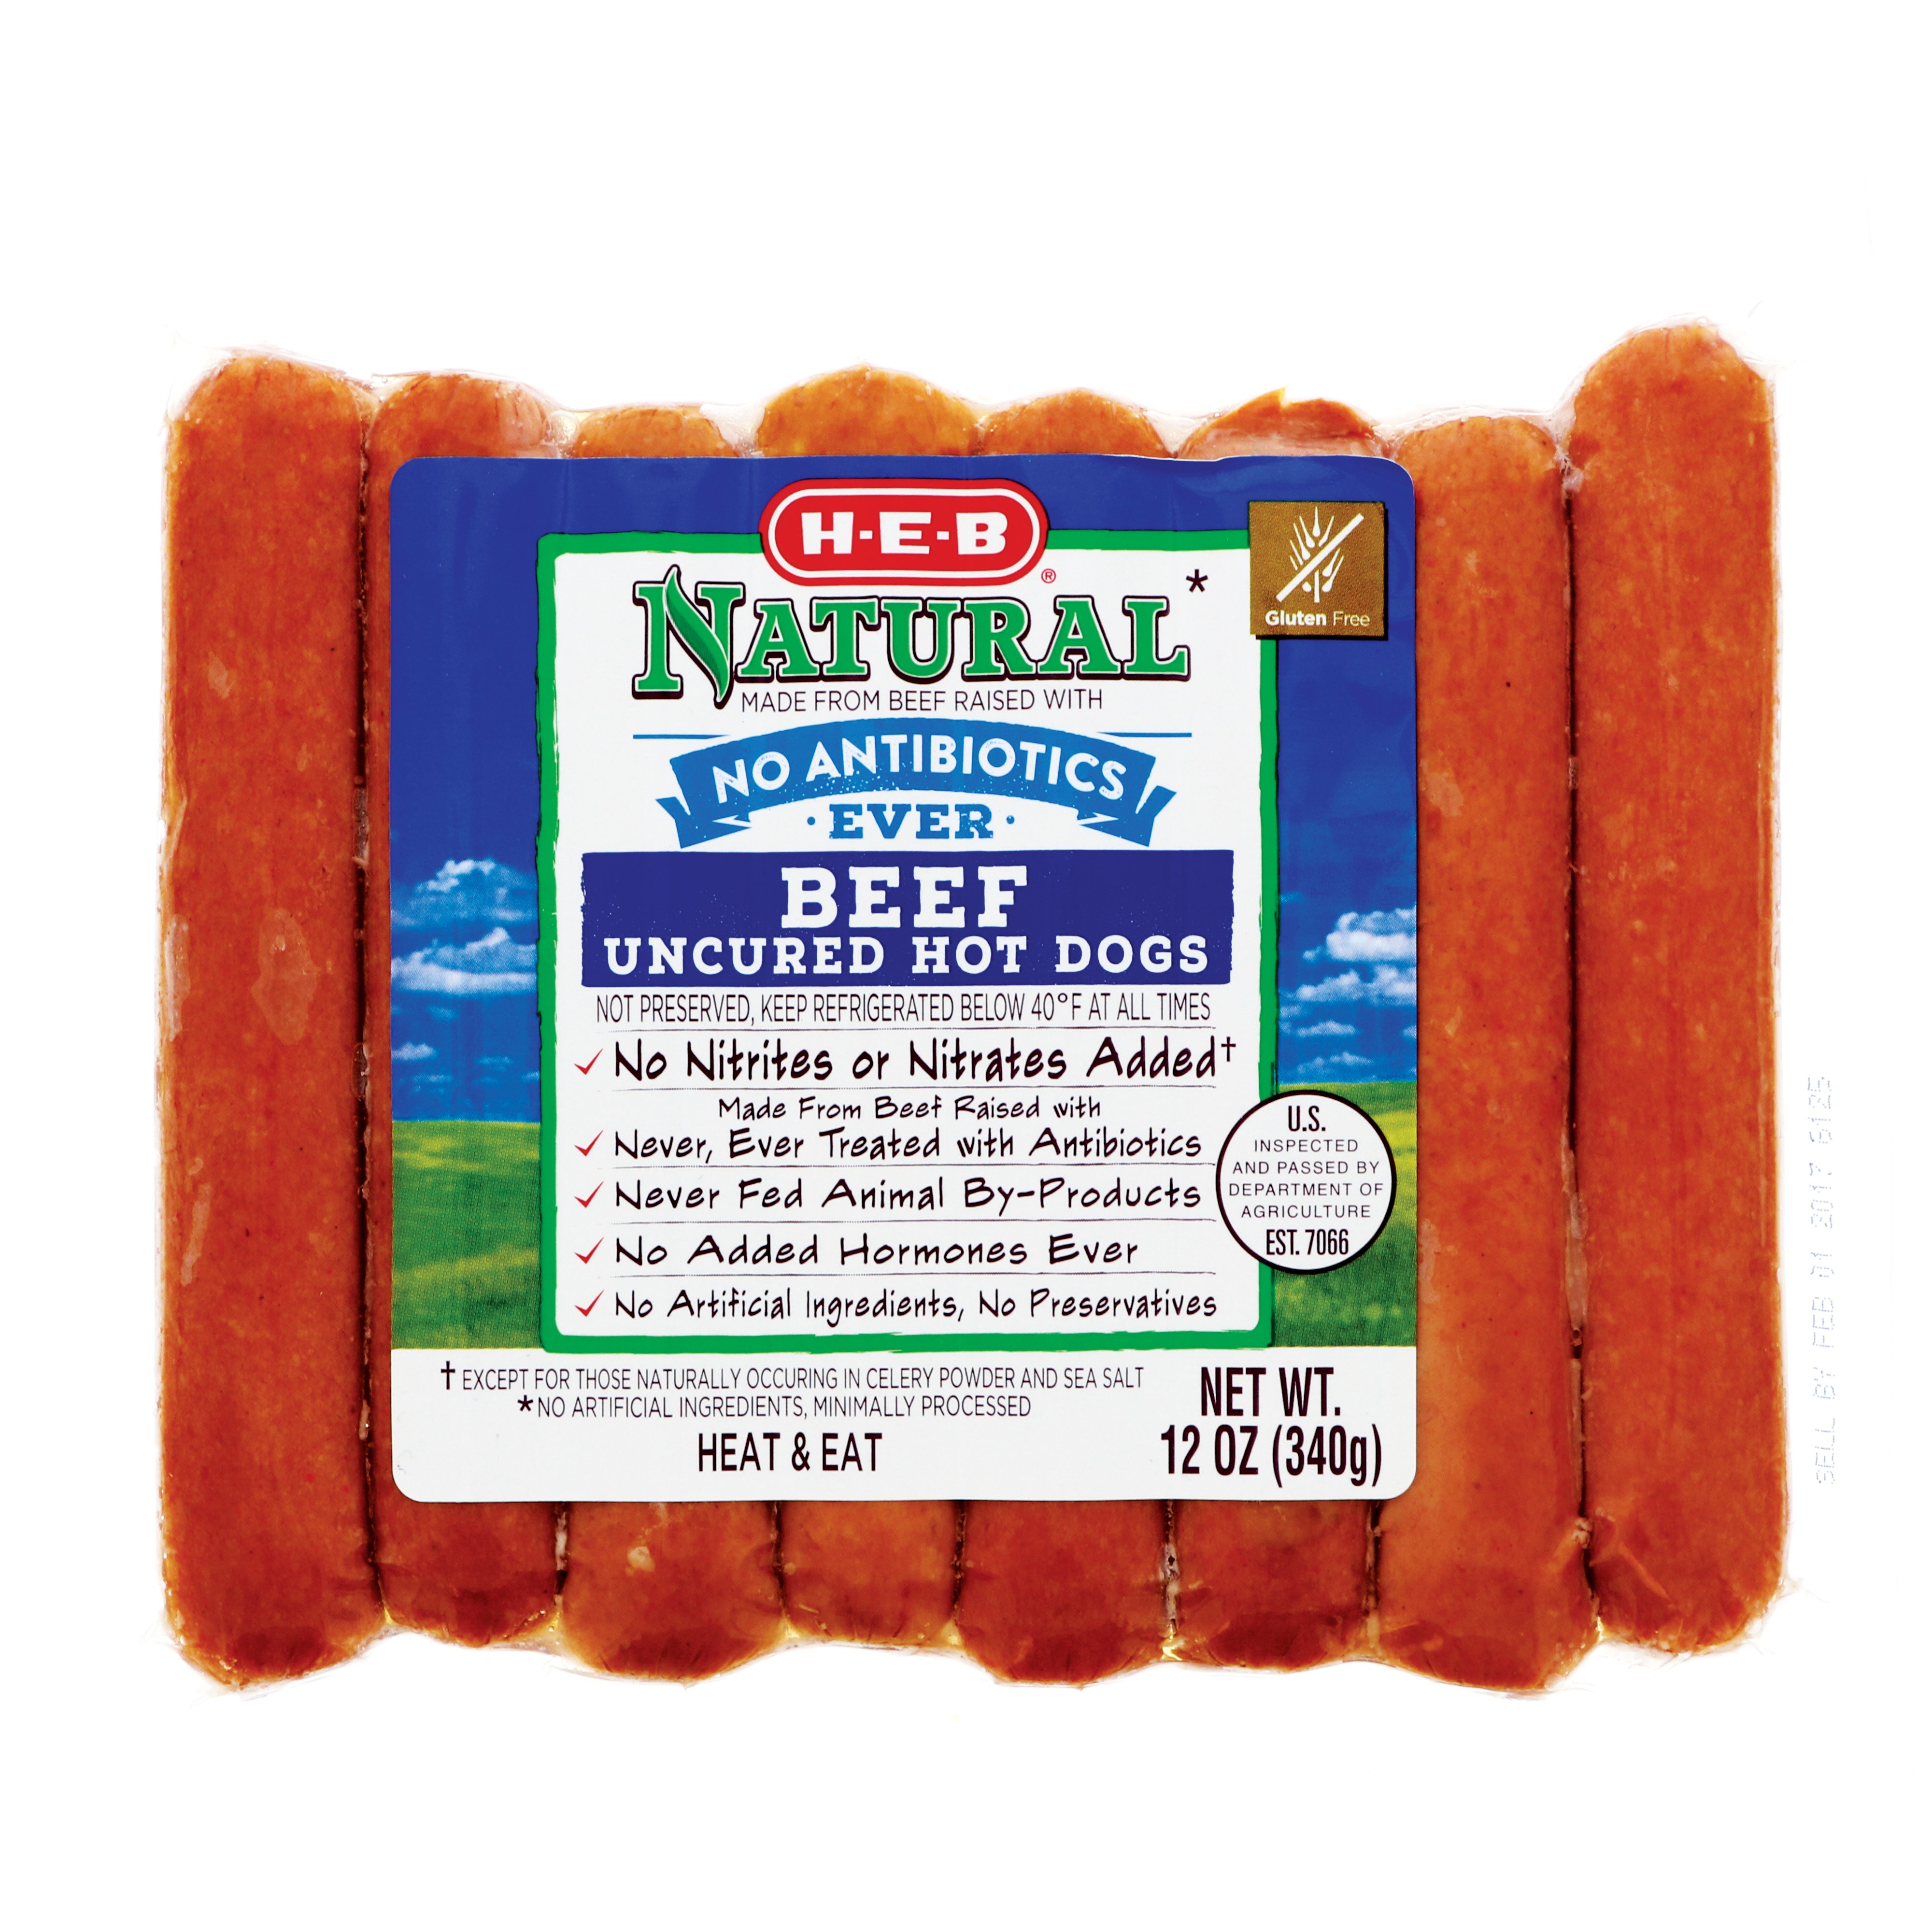 H-E-B Natural Beef Hot Dogs - Shop Hot Dogs at H-E-B